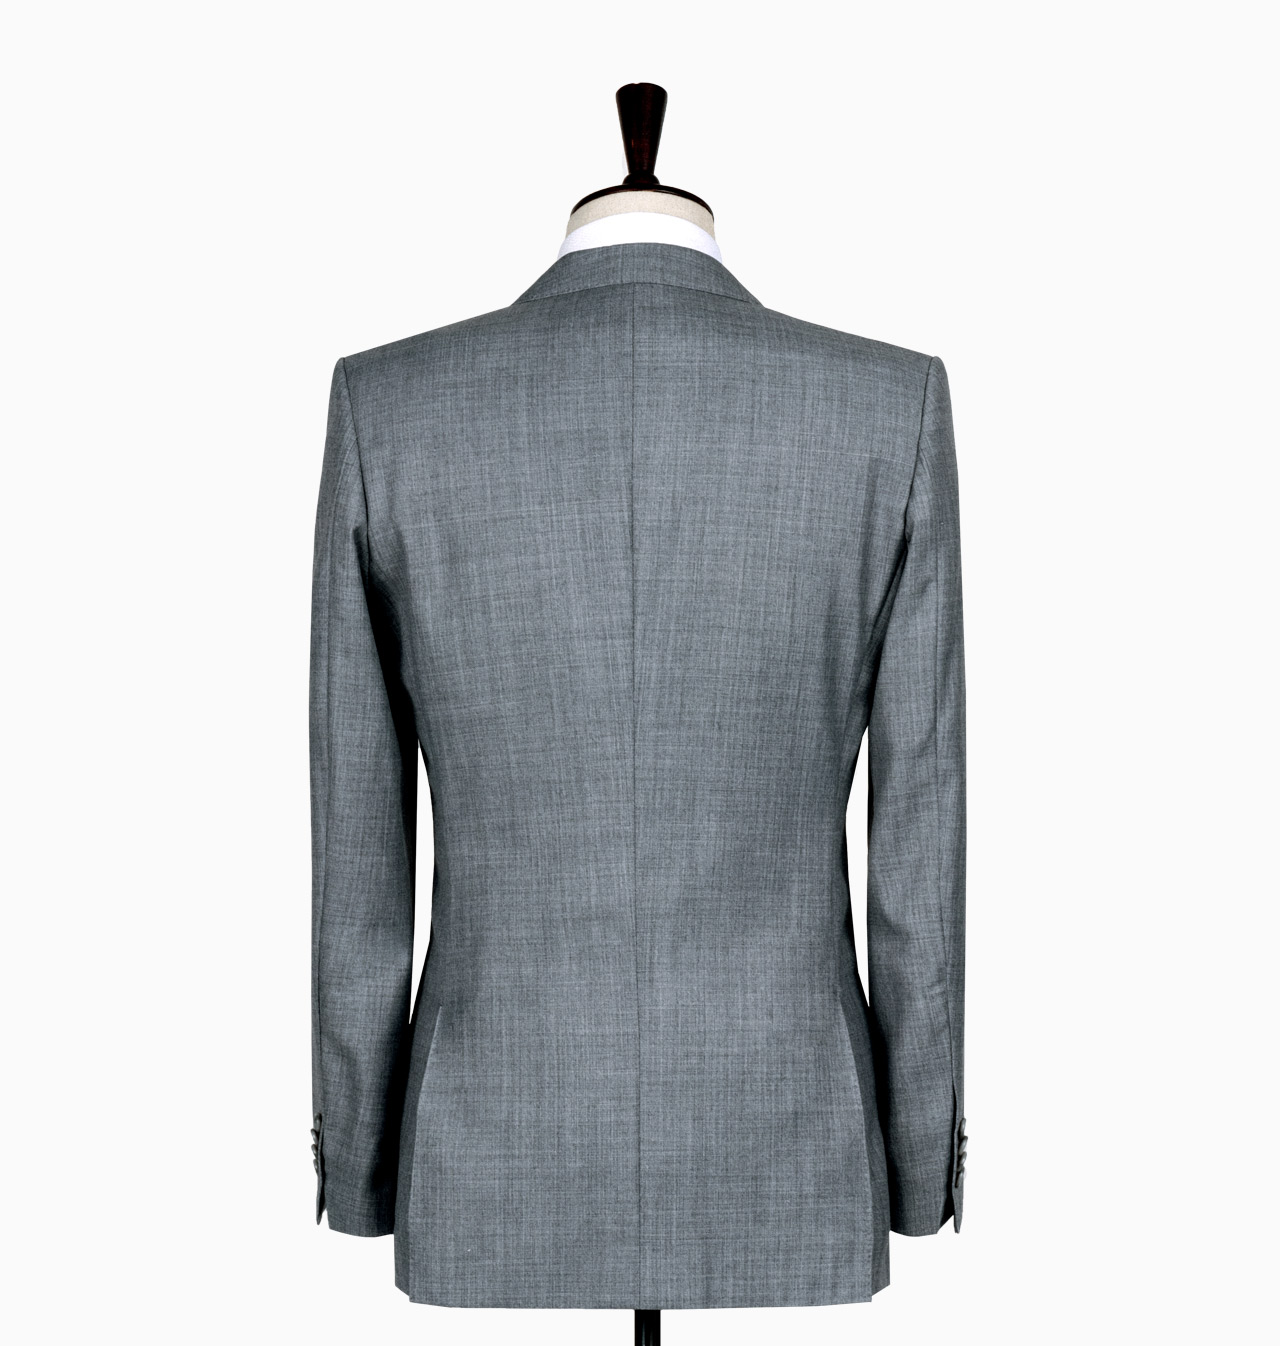 Mid Grey Twill / S1563 - Suiting